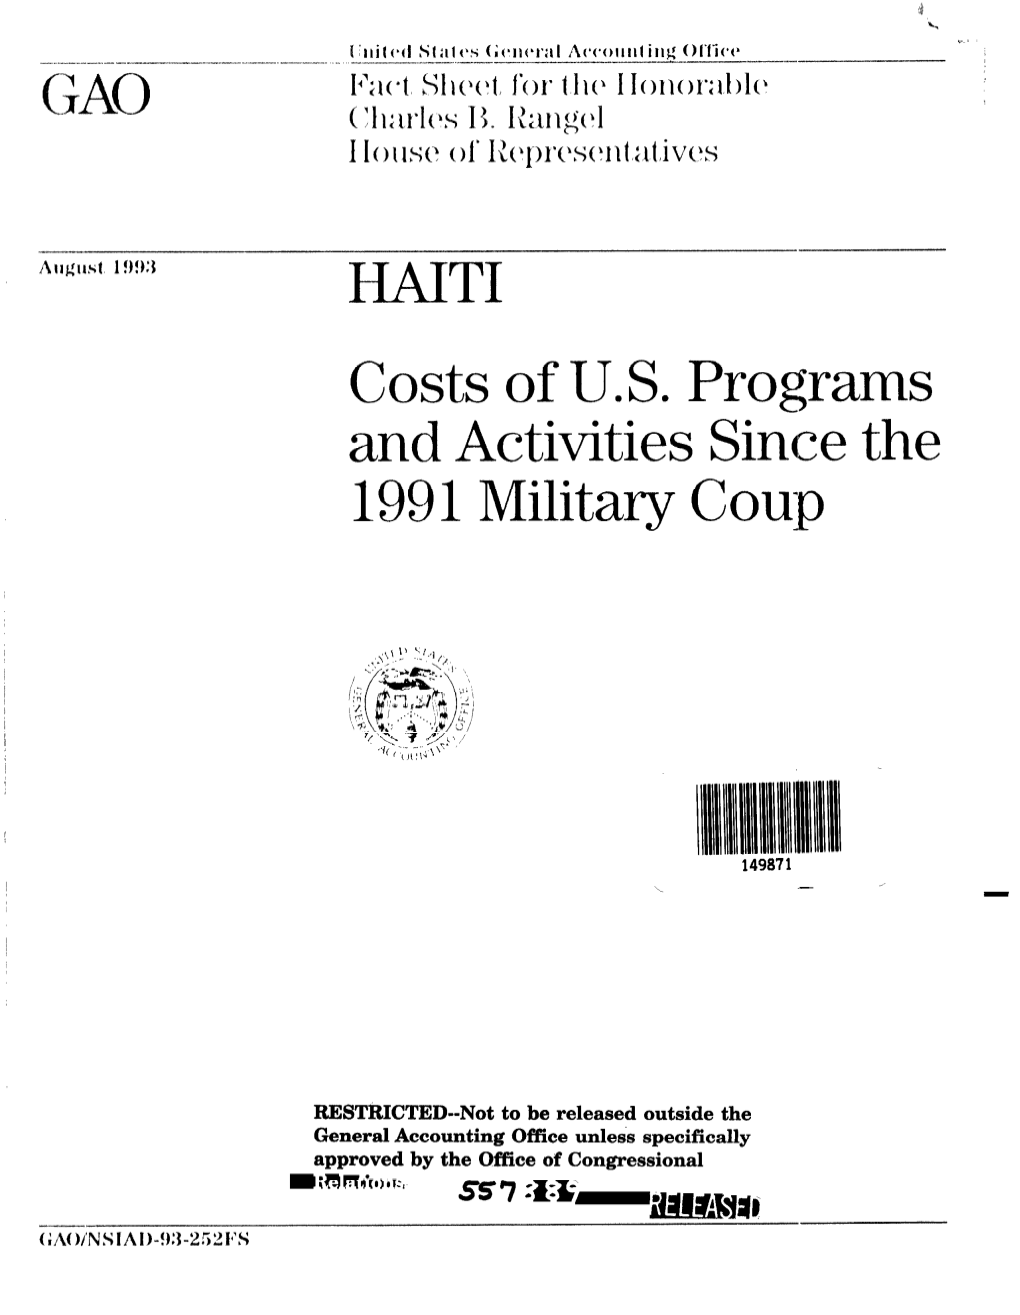 Haiti, Costs of U.S. Programs and Activities Since the 1991 Military Coup